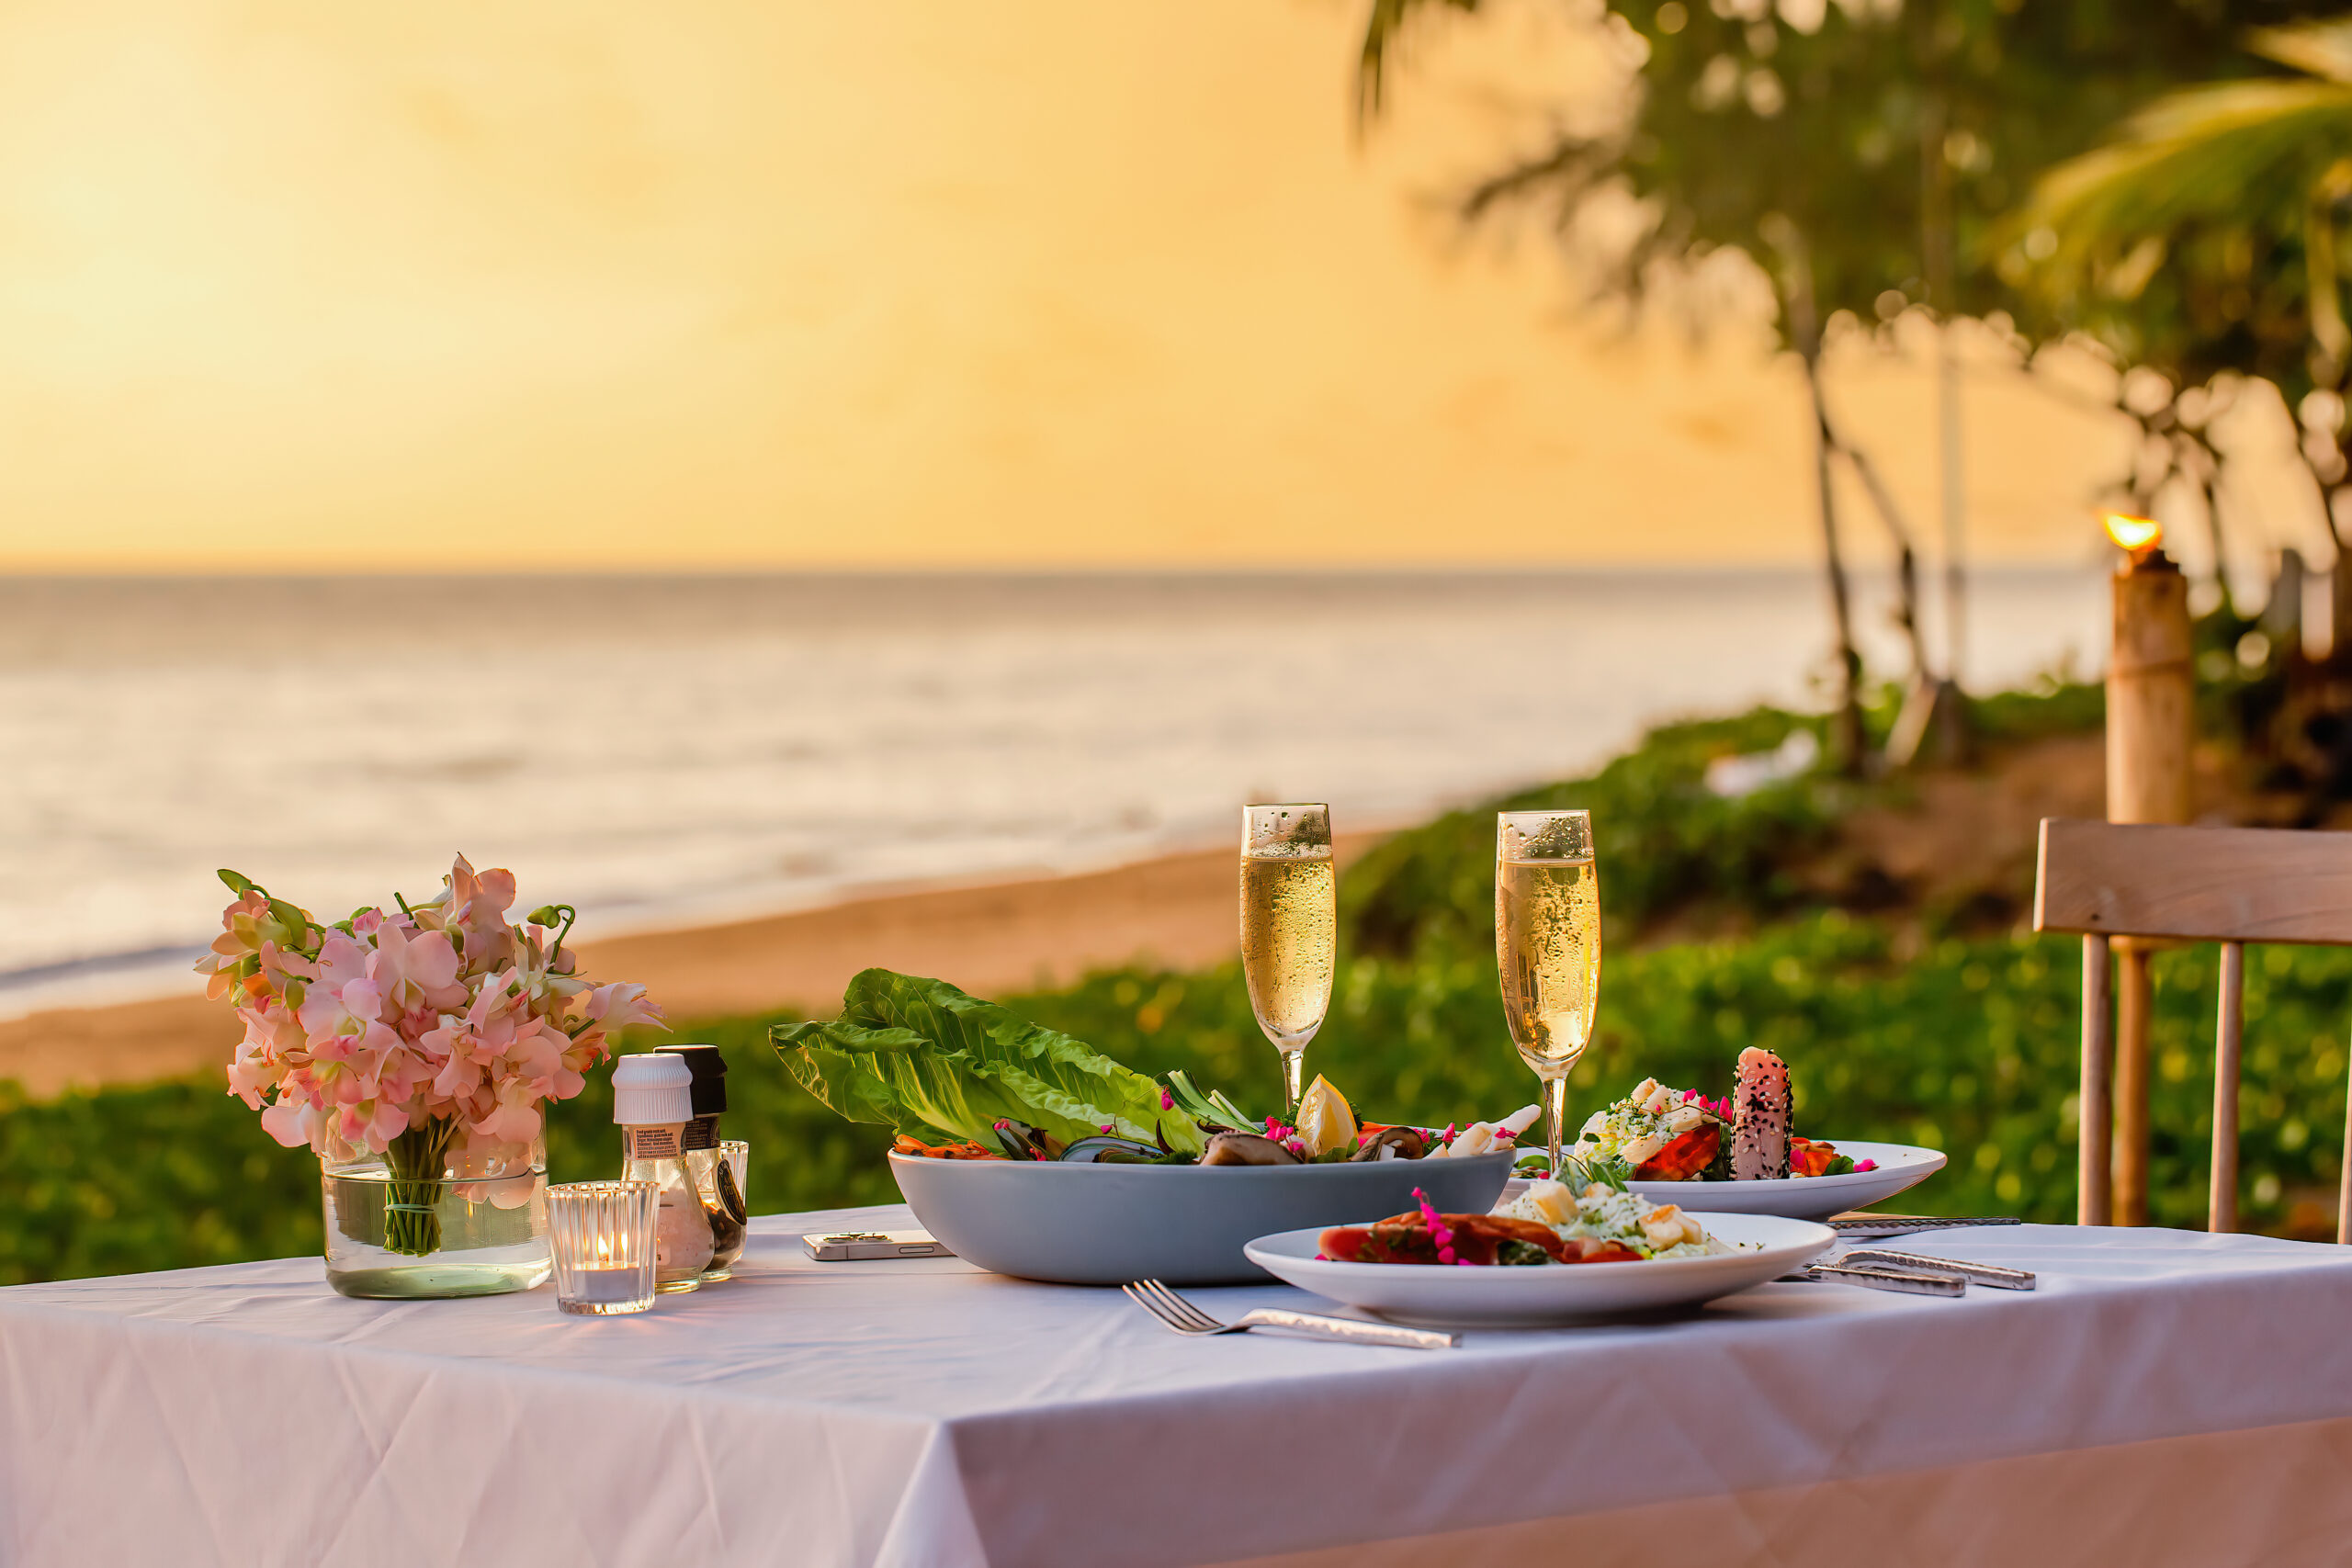 Romantic dinner by the beach at Movenpick Resort Cam Ranh's private shore.